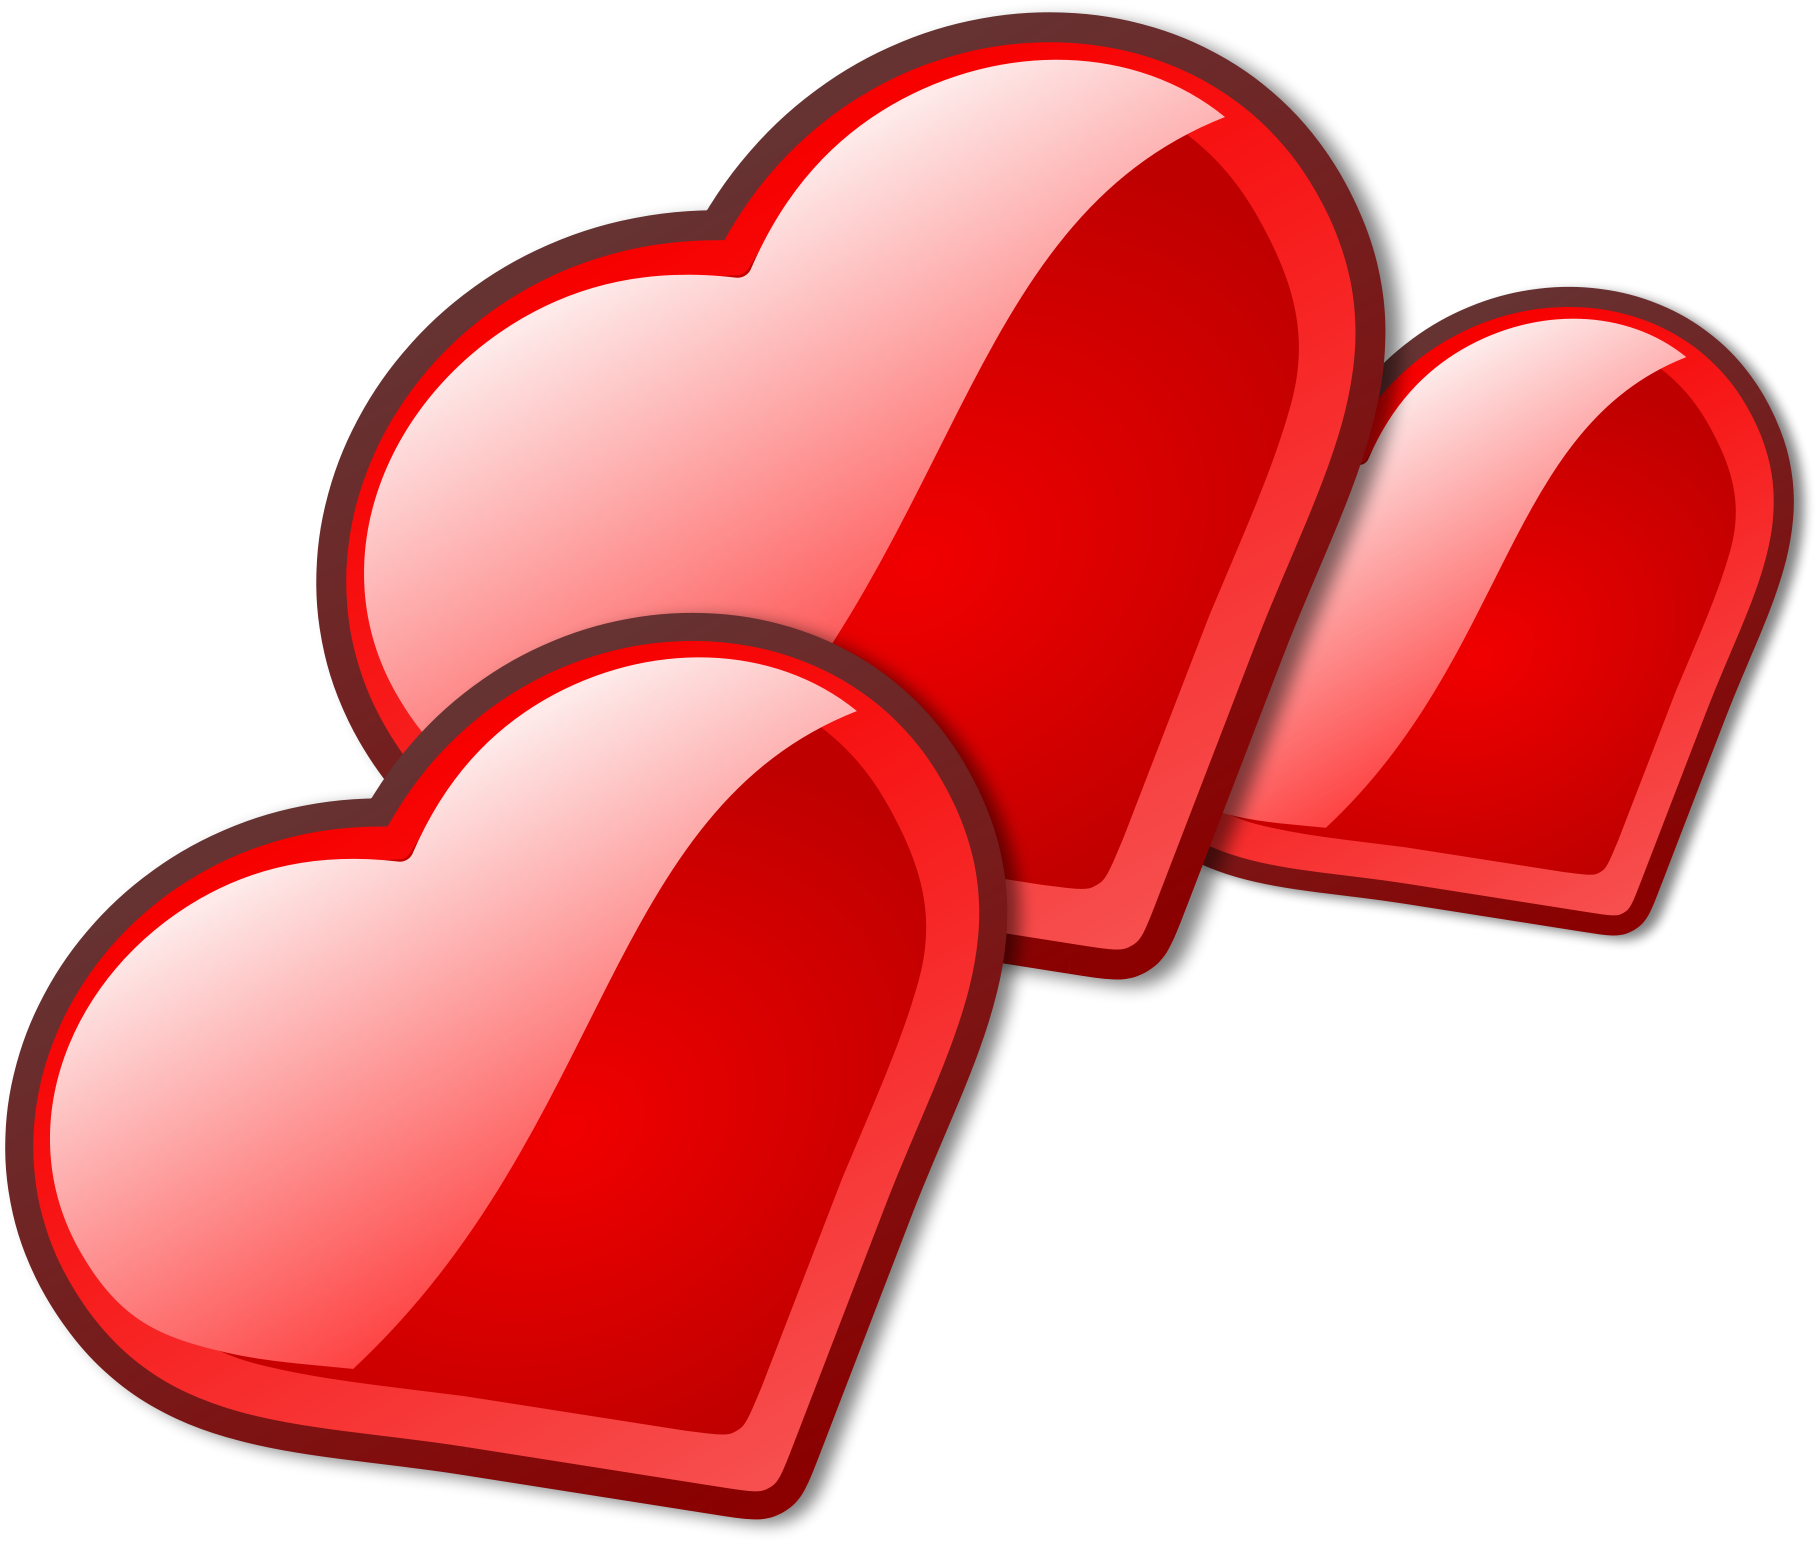 Red Hearts Illustration PNG